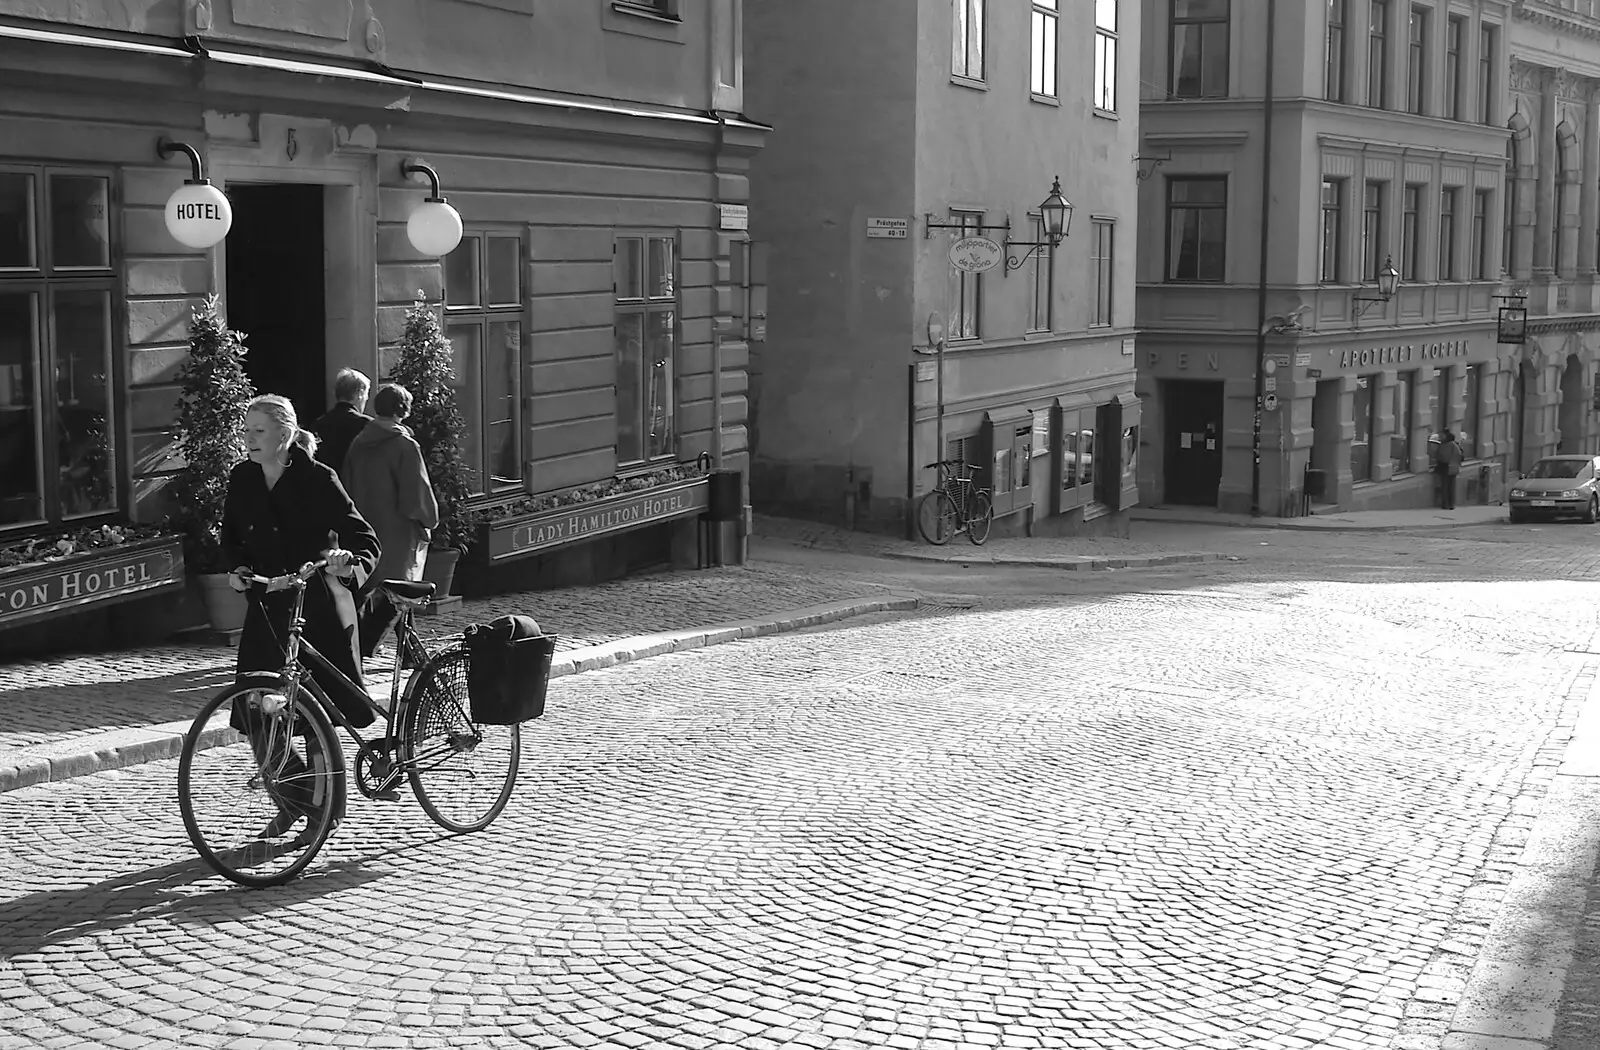 Pushing a bike uphill by the Lady Hamilton Hotel, from A Postcard From Stockholm: A Working Trip to Sweden - 24th April 2005